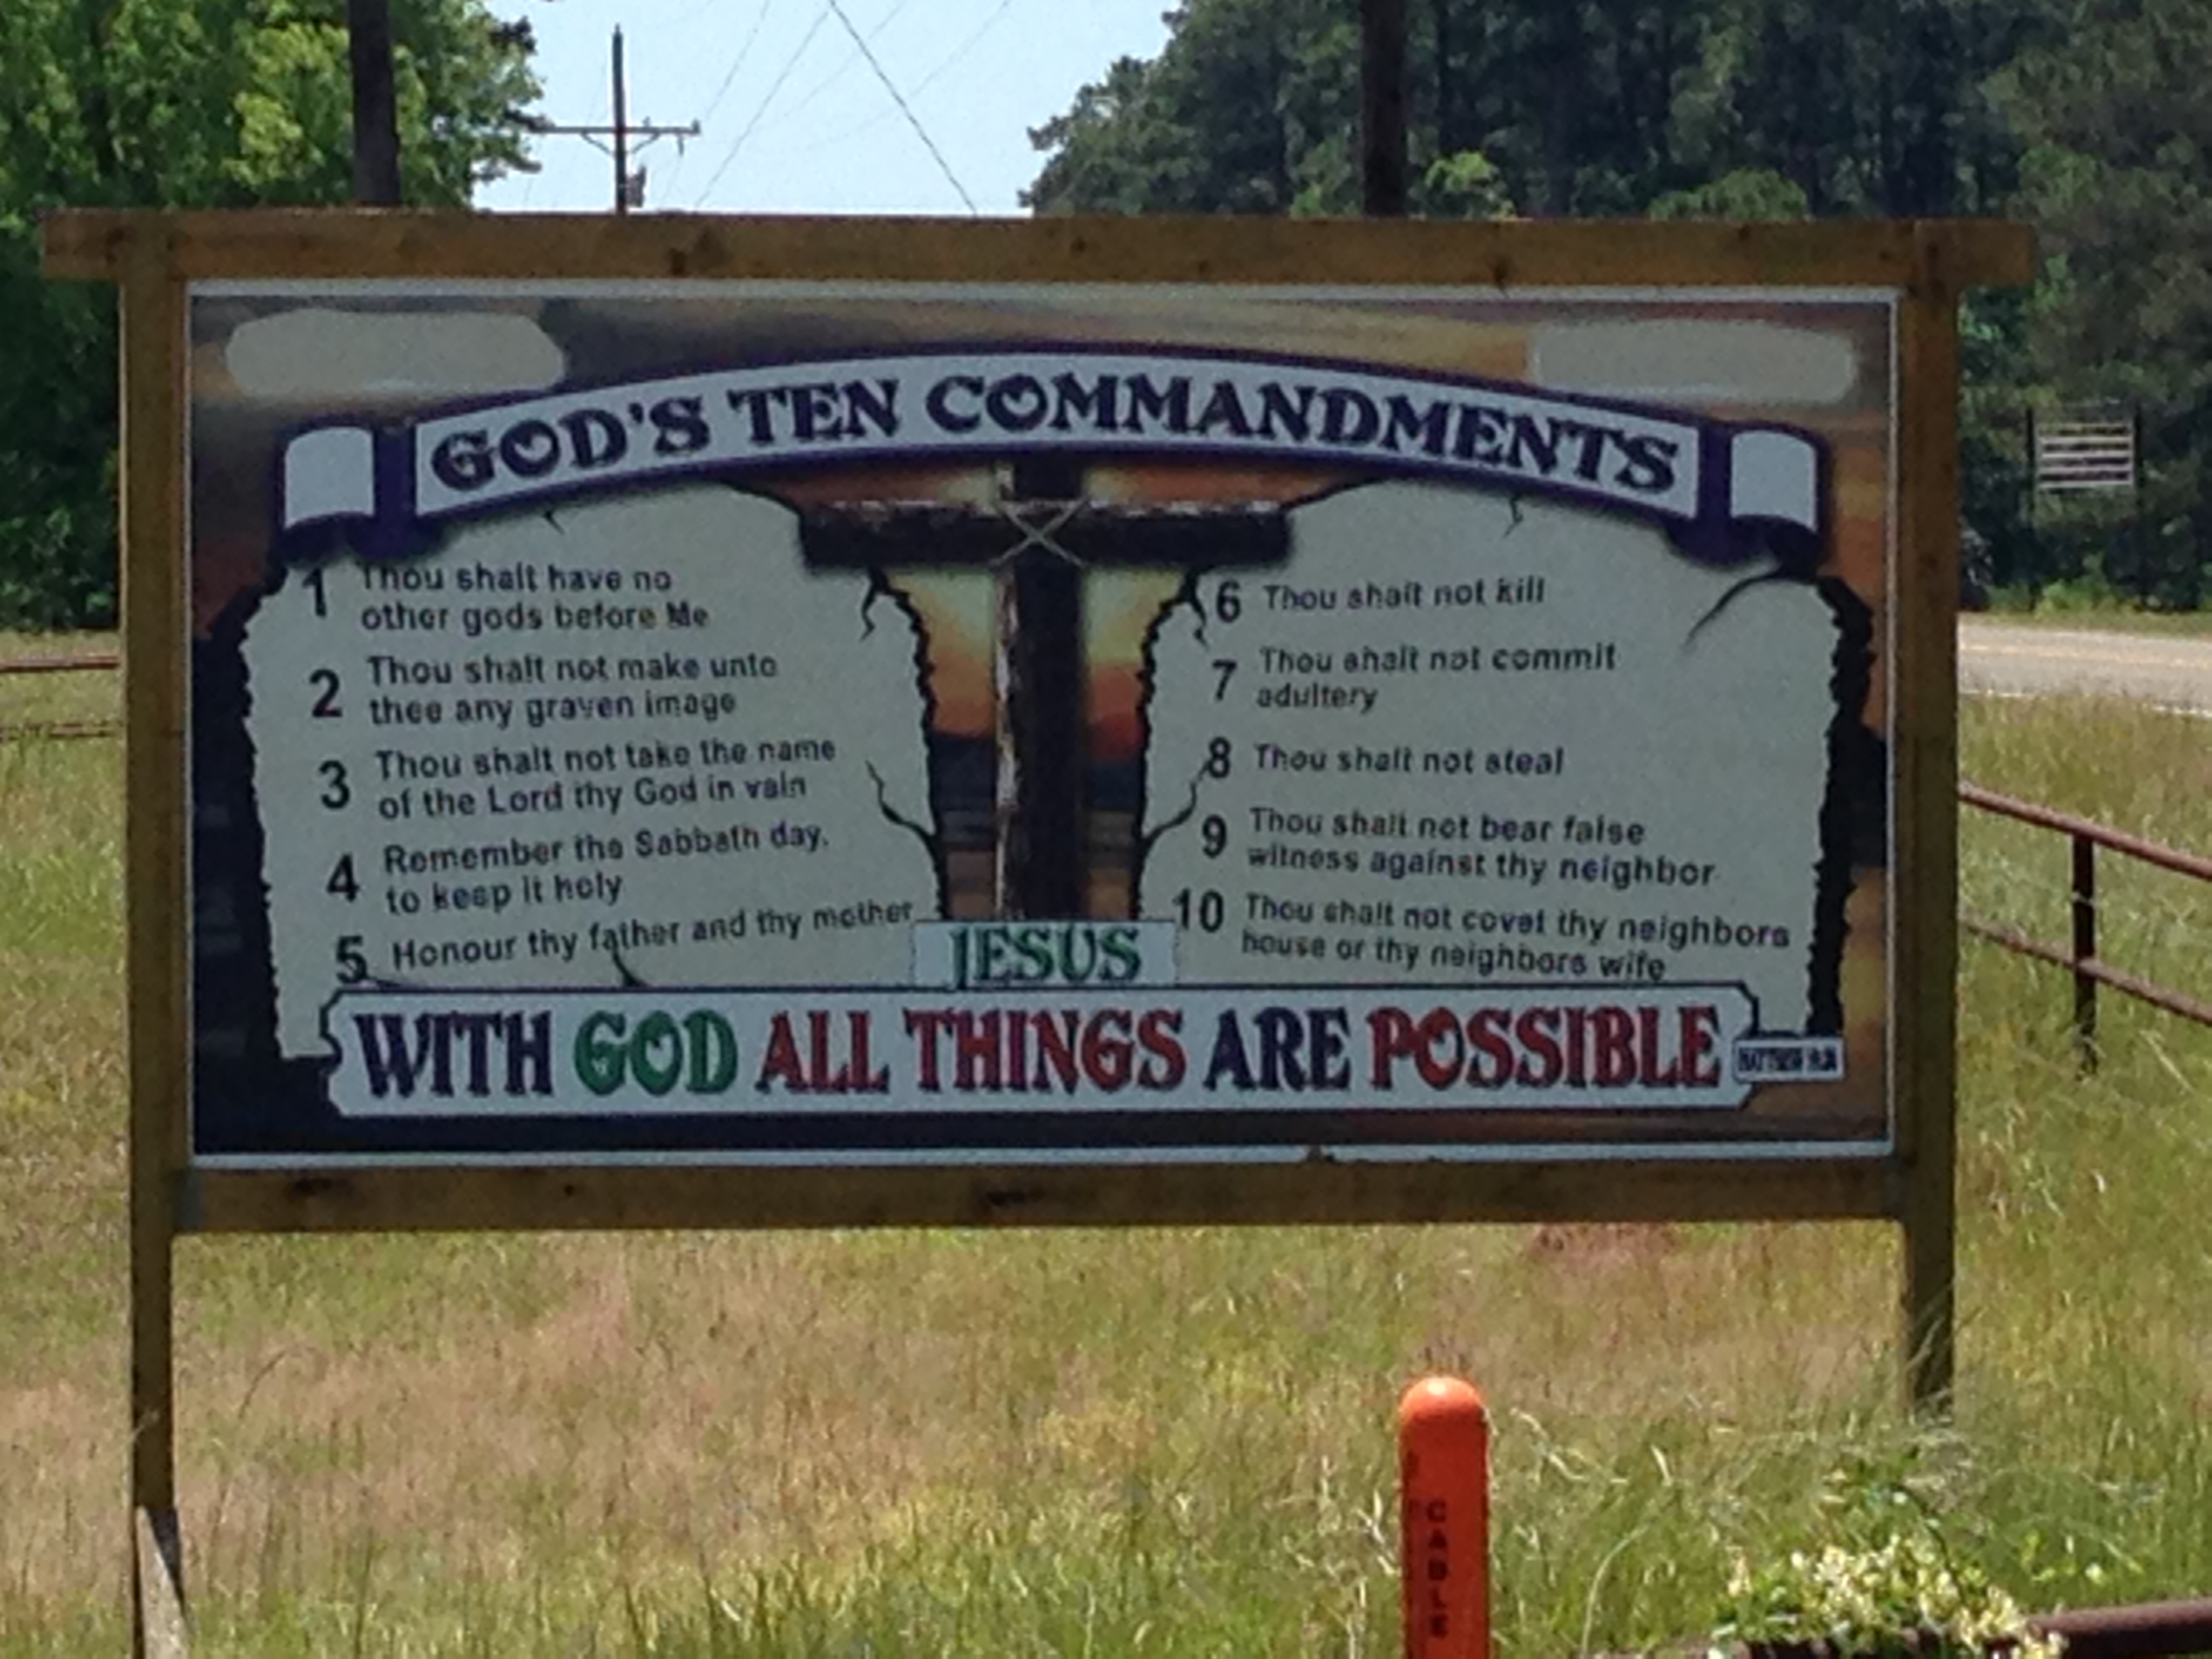 The 10 Commandments sign near Hemphill, Texas, has been deemed illegal by the Texas Department of Transportation. (Michael Berry—Liberty Institute)